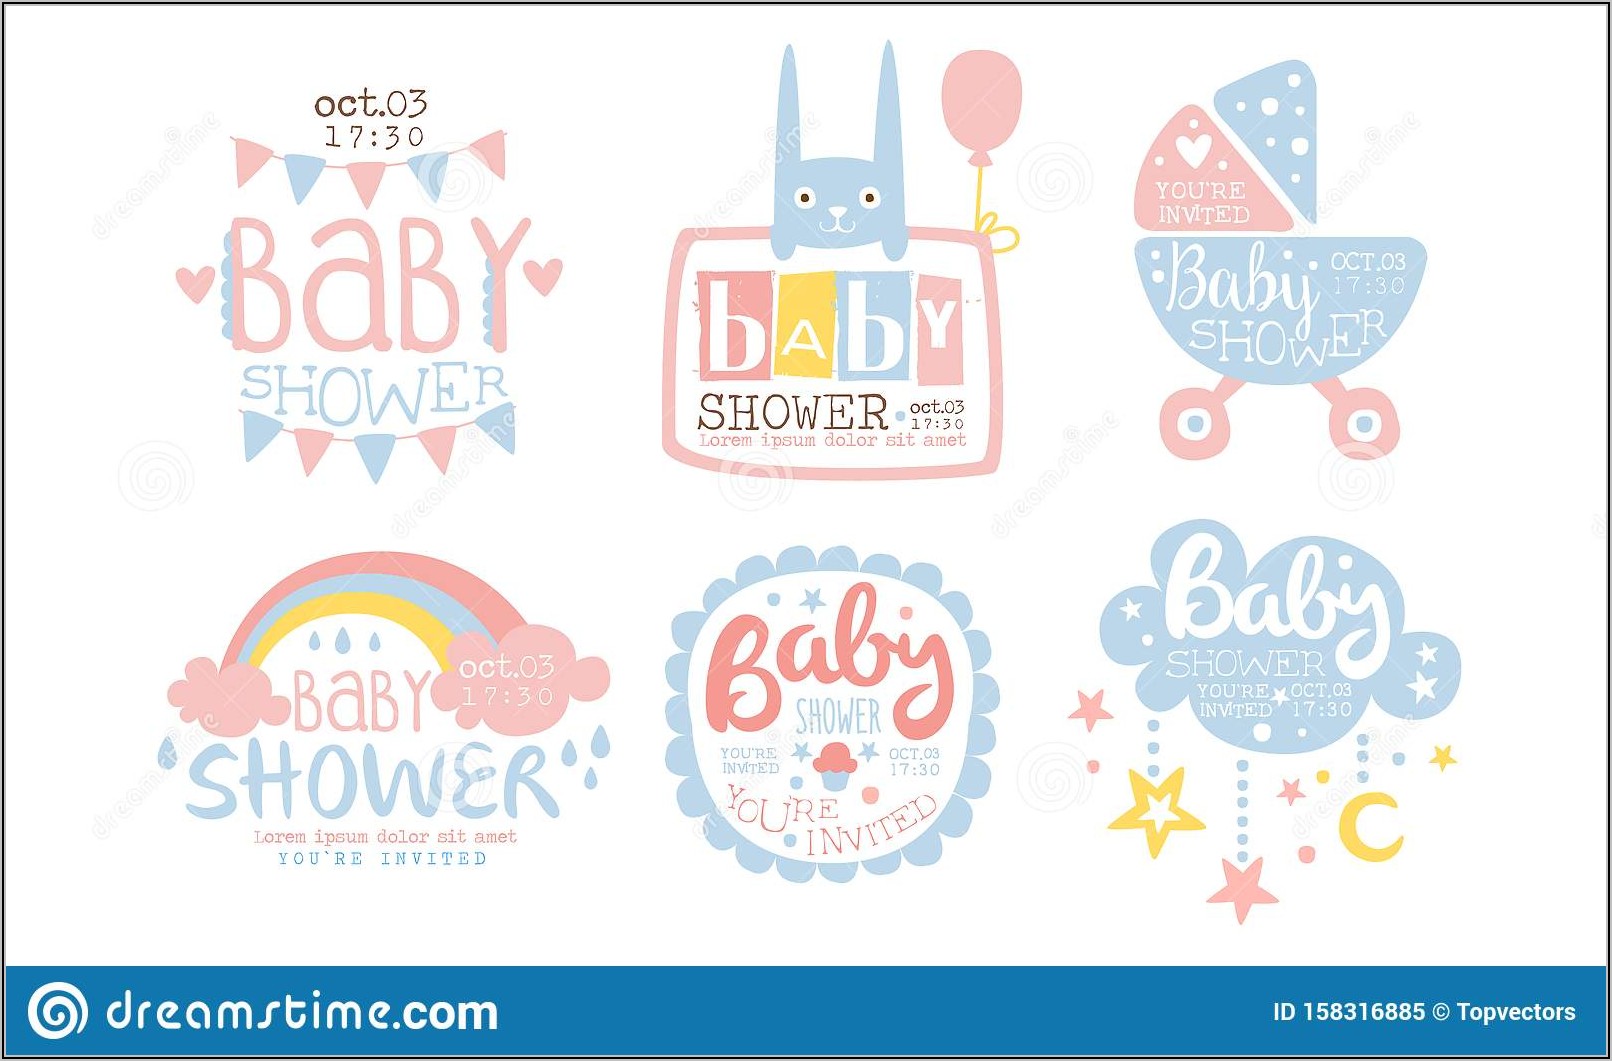 Baby Shower Invitation Templates For Boy